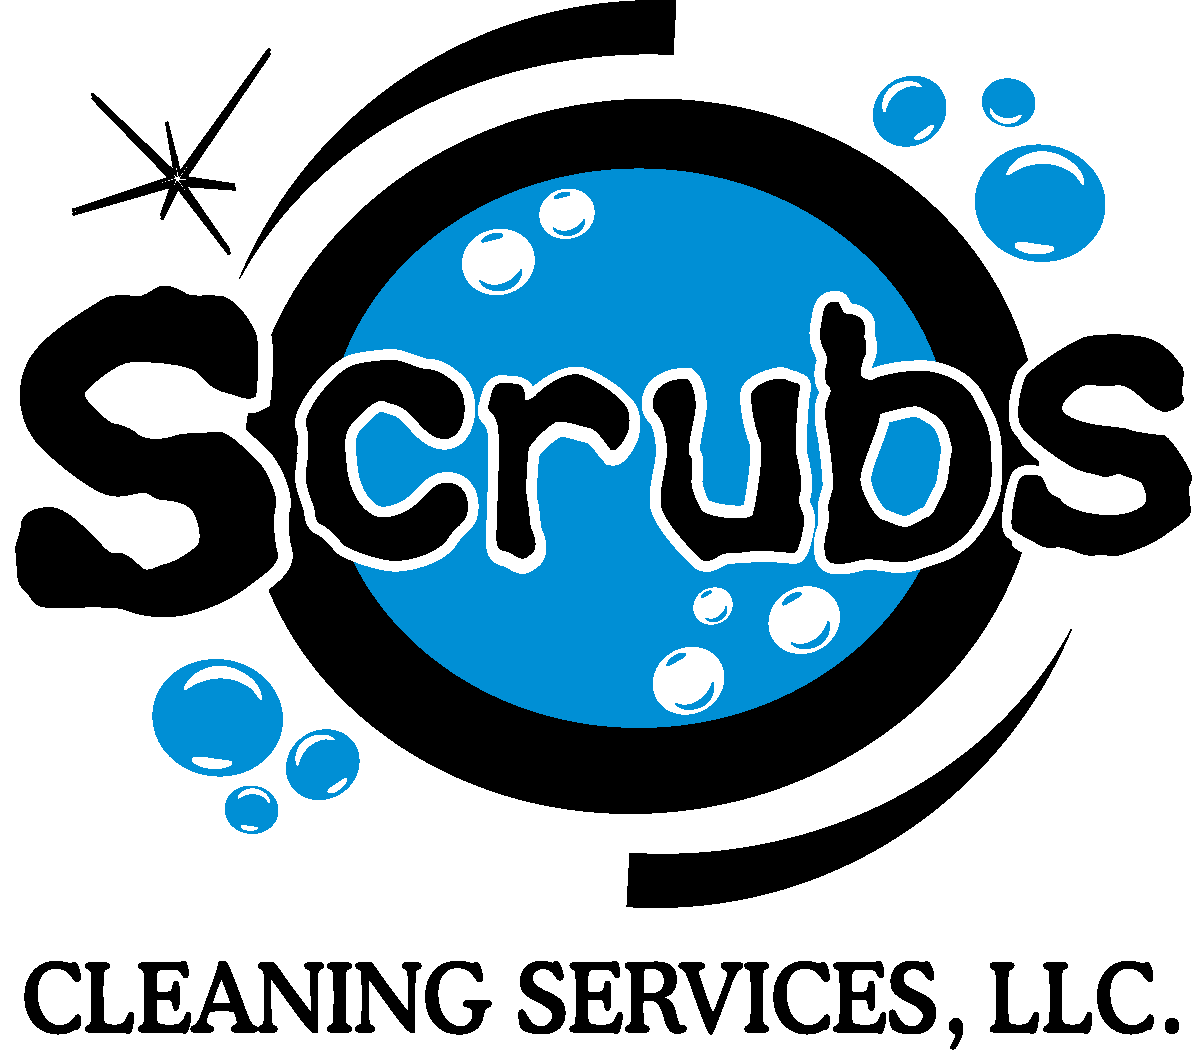 Scrubs Cleaning Services LLC